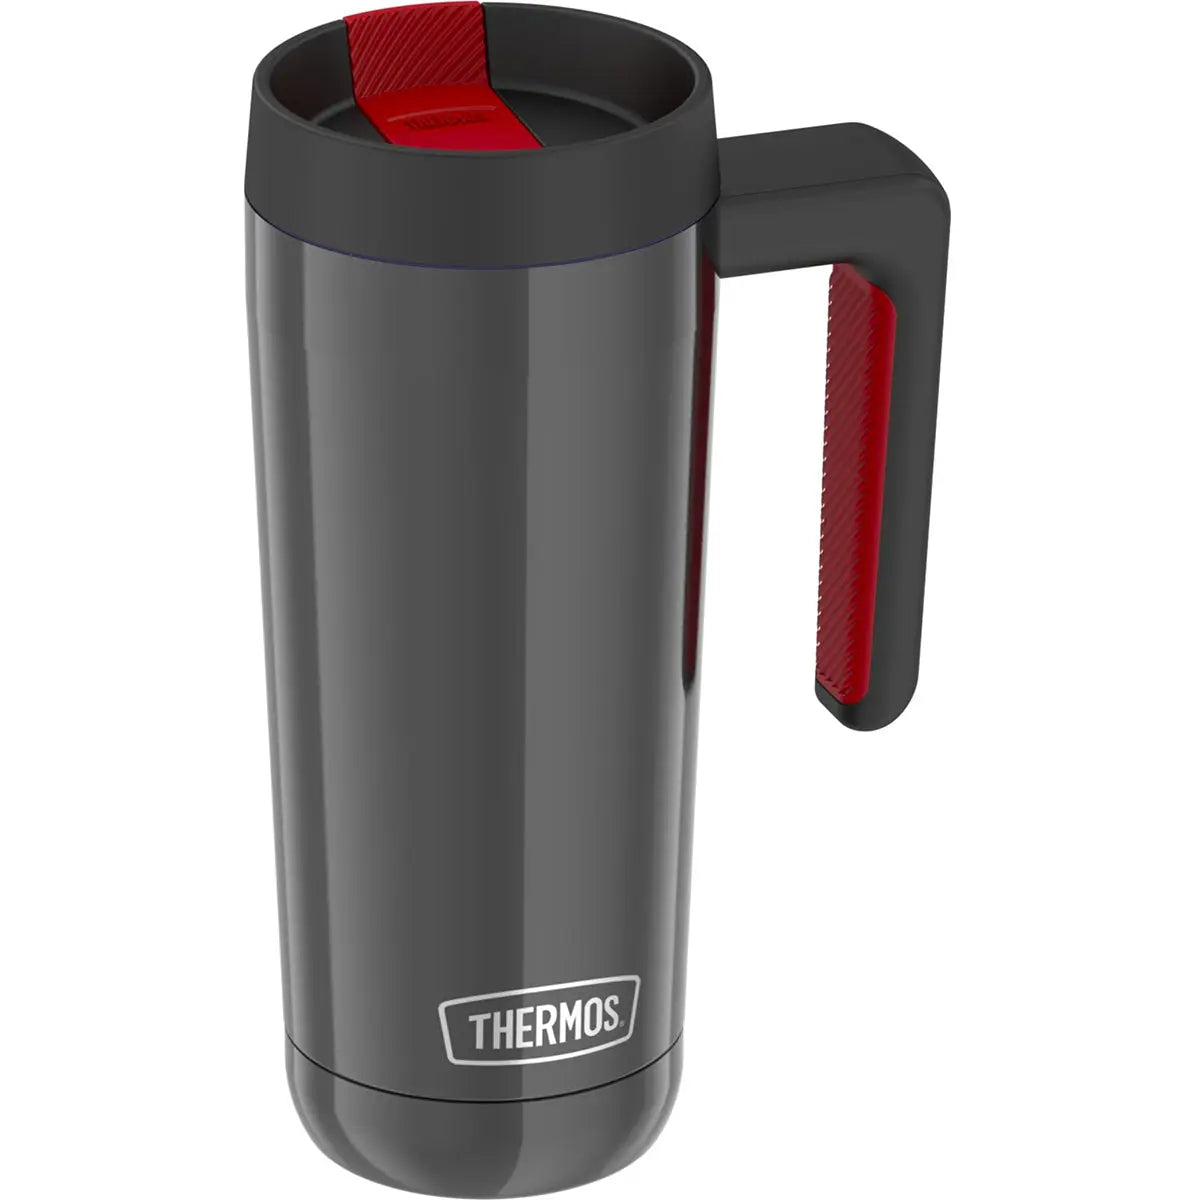 Thermos 18 oz. Vacuum Insulated Stainless Steel Travel Mug Thermos